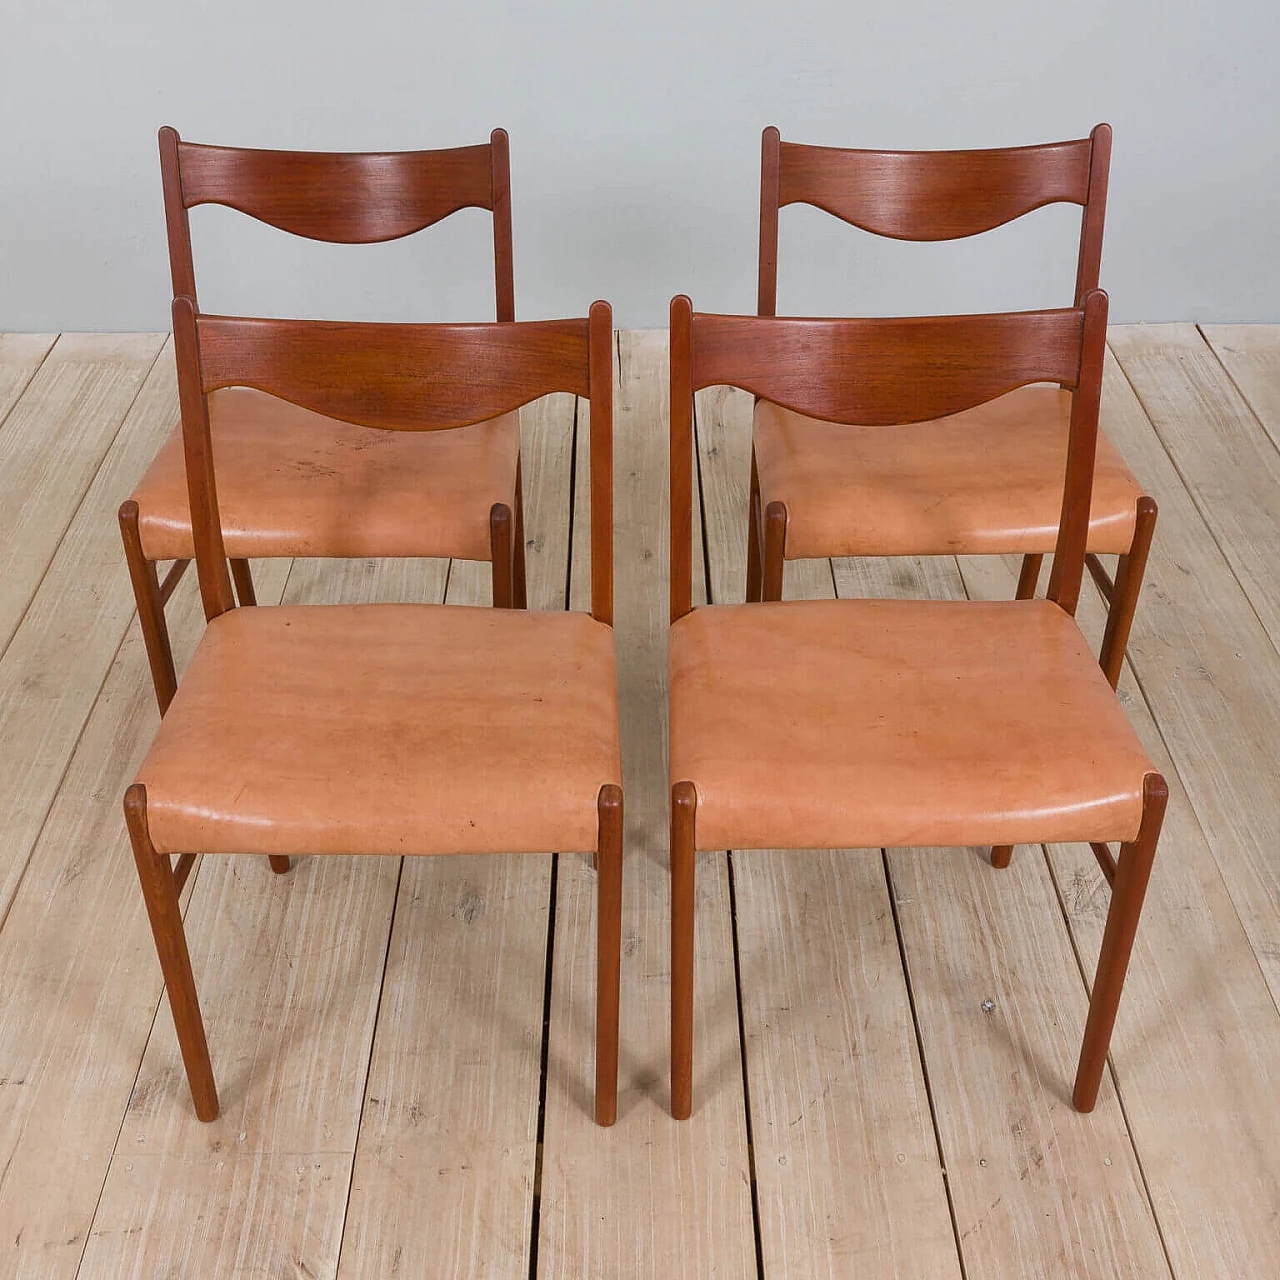 4 GS60 chairs in teak and leather by Arne Wahl Iversen for Glyngøre Stolefabrik, 60s 2